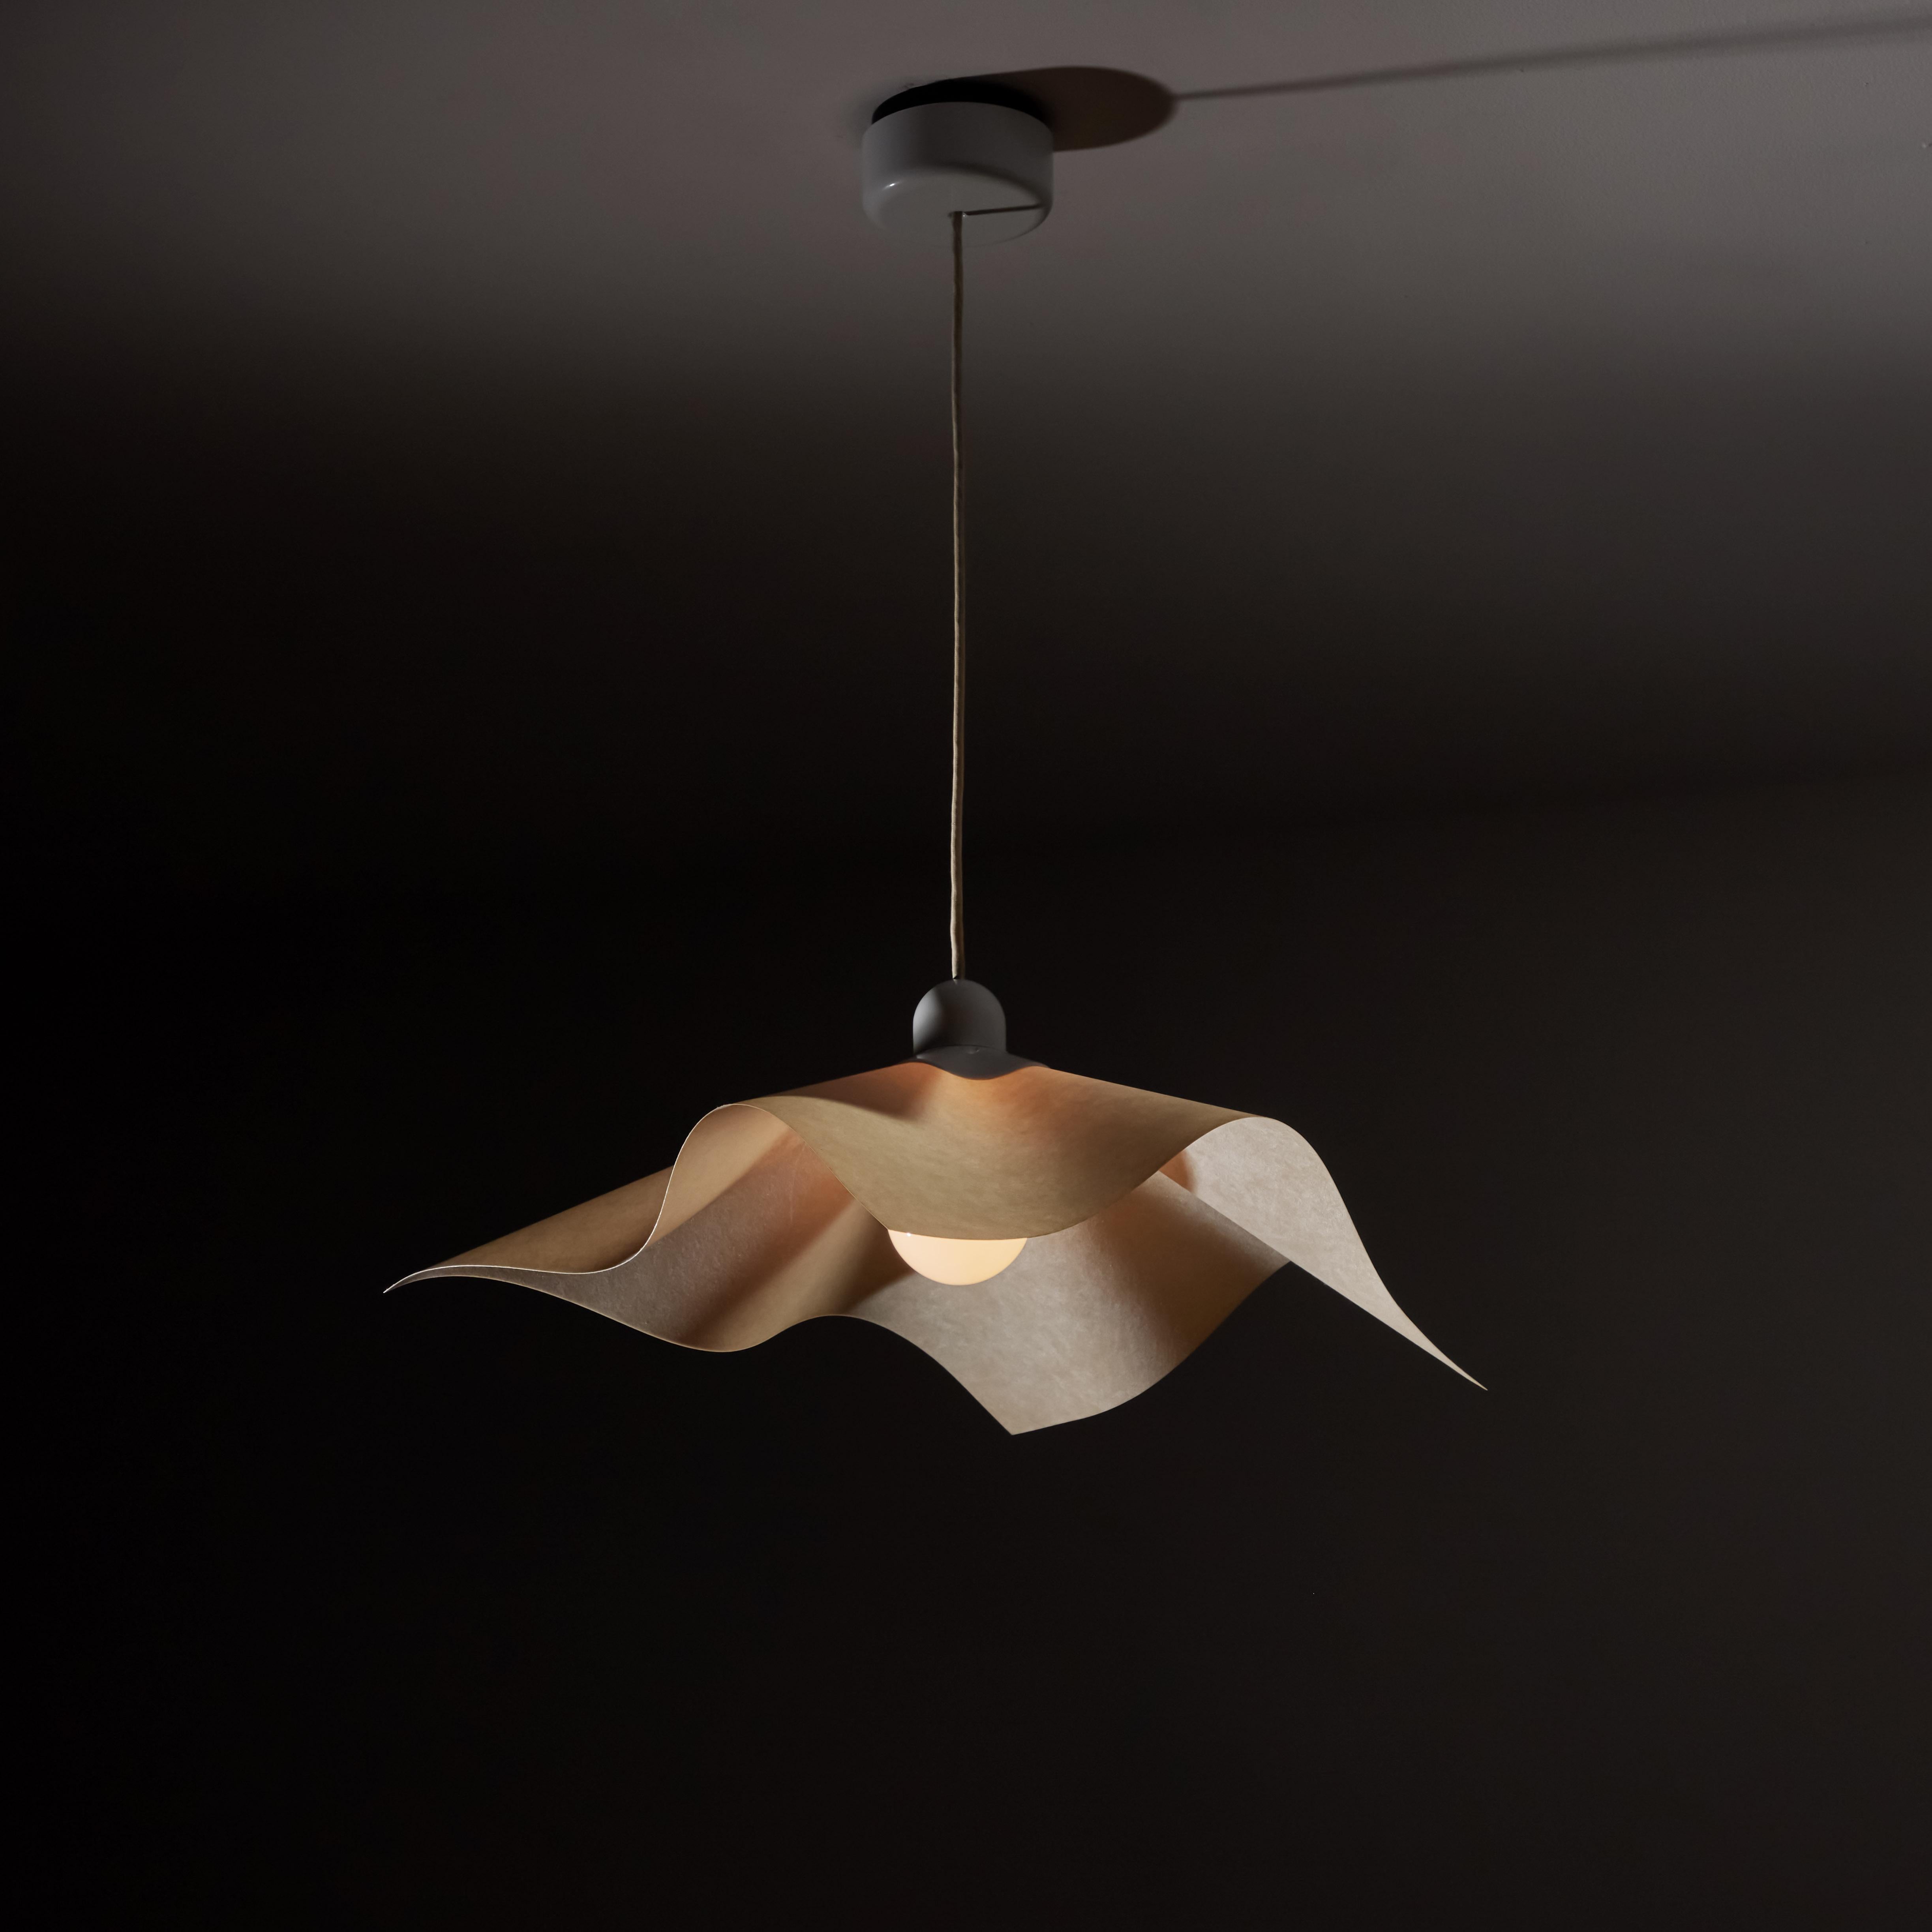 Area Curvea ceiling light by Mario Bellini & Giorgio Origlia for Artemide. Designed and manufactured in Italy, 1974. Steel, acrylic, with resin shade. Original cord, wired for U.S. standards. We recommend one E27 60w maximum bulb. Bulb not included.